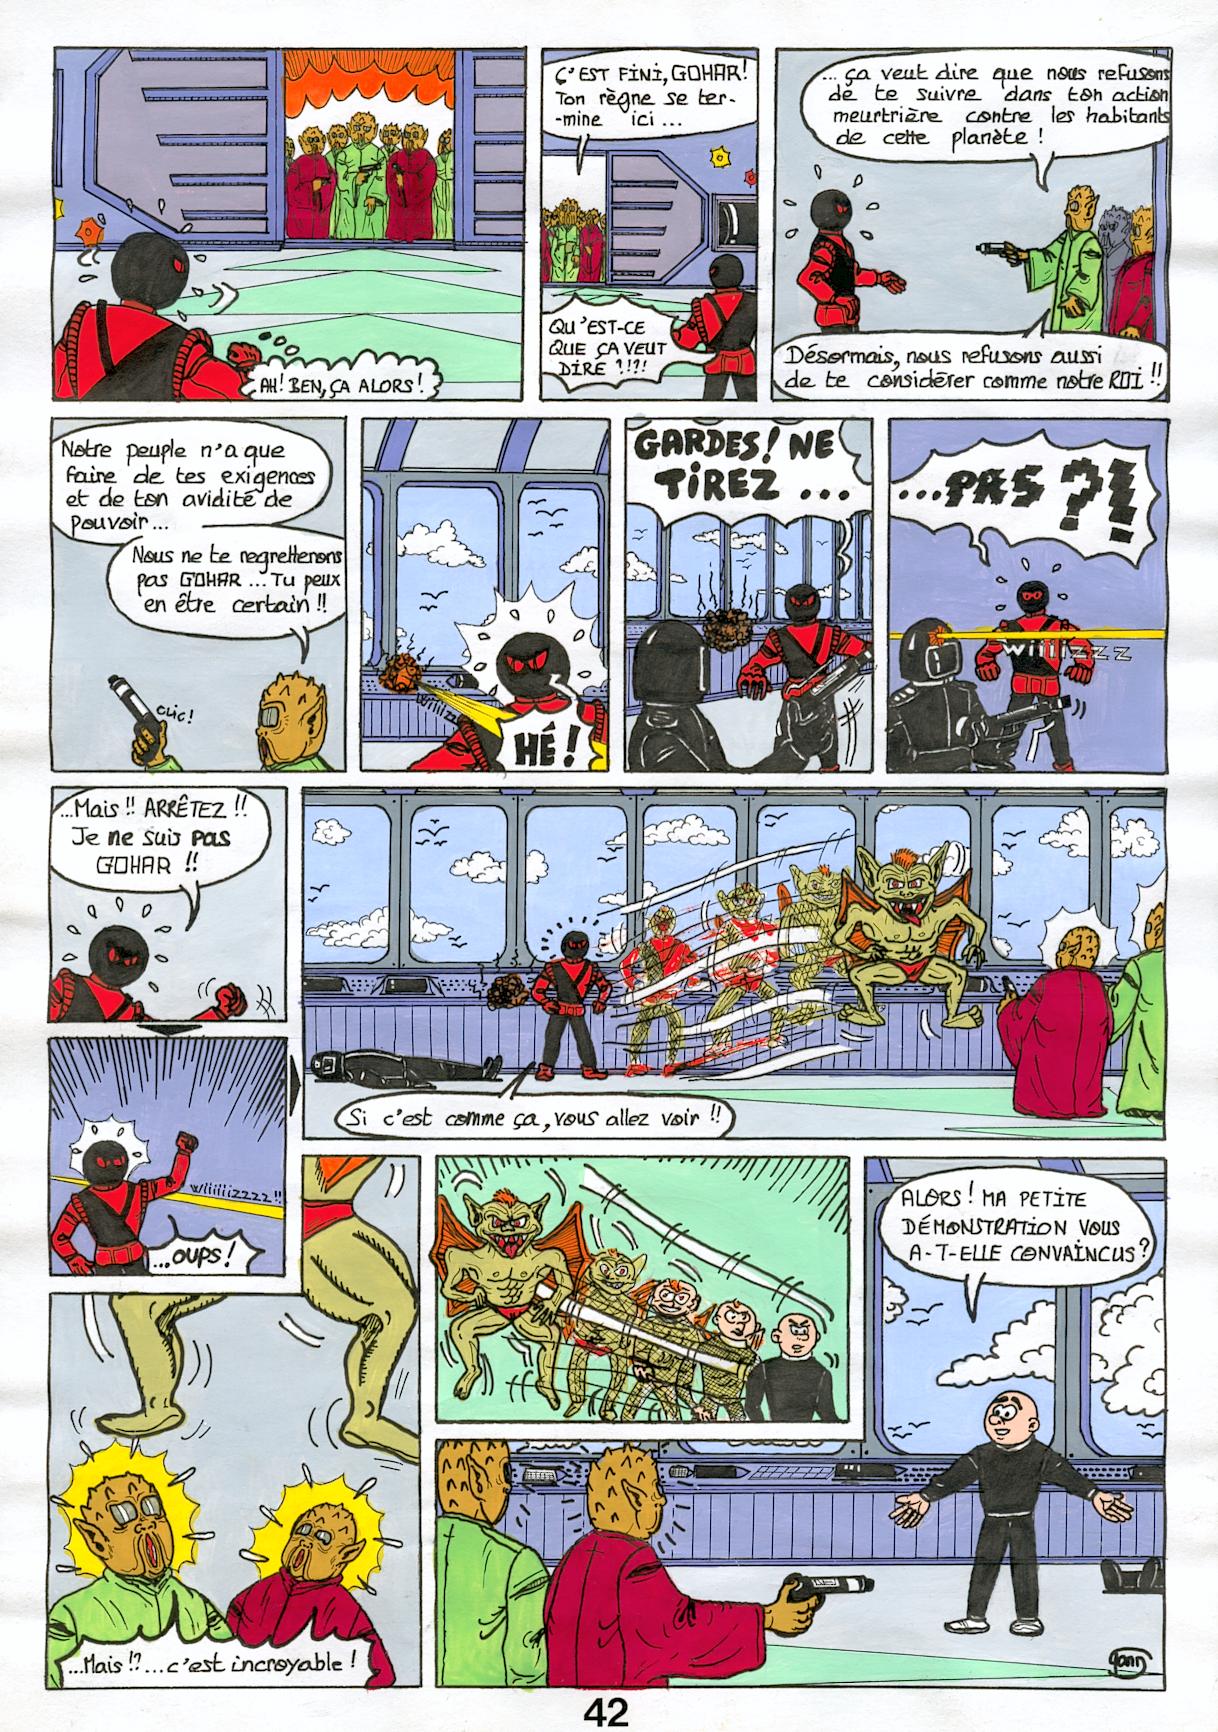 BD 8 page 42